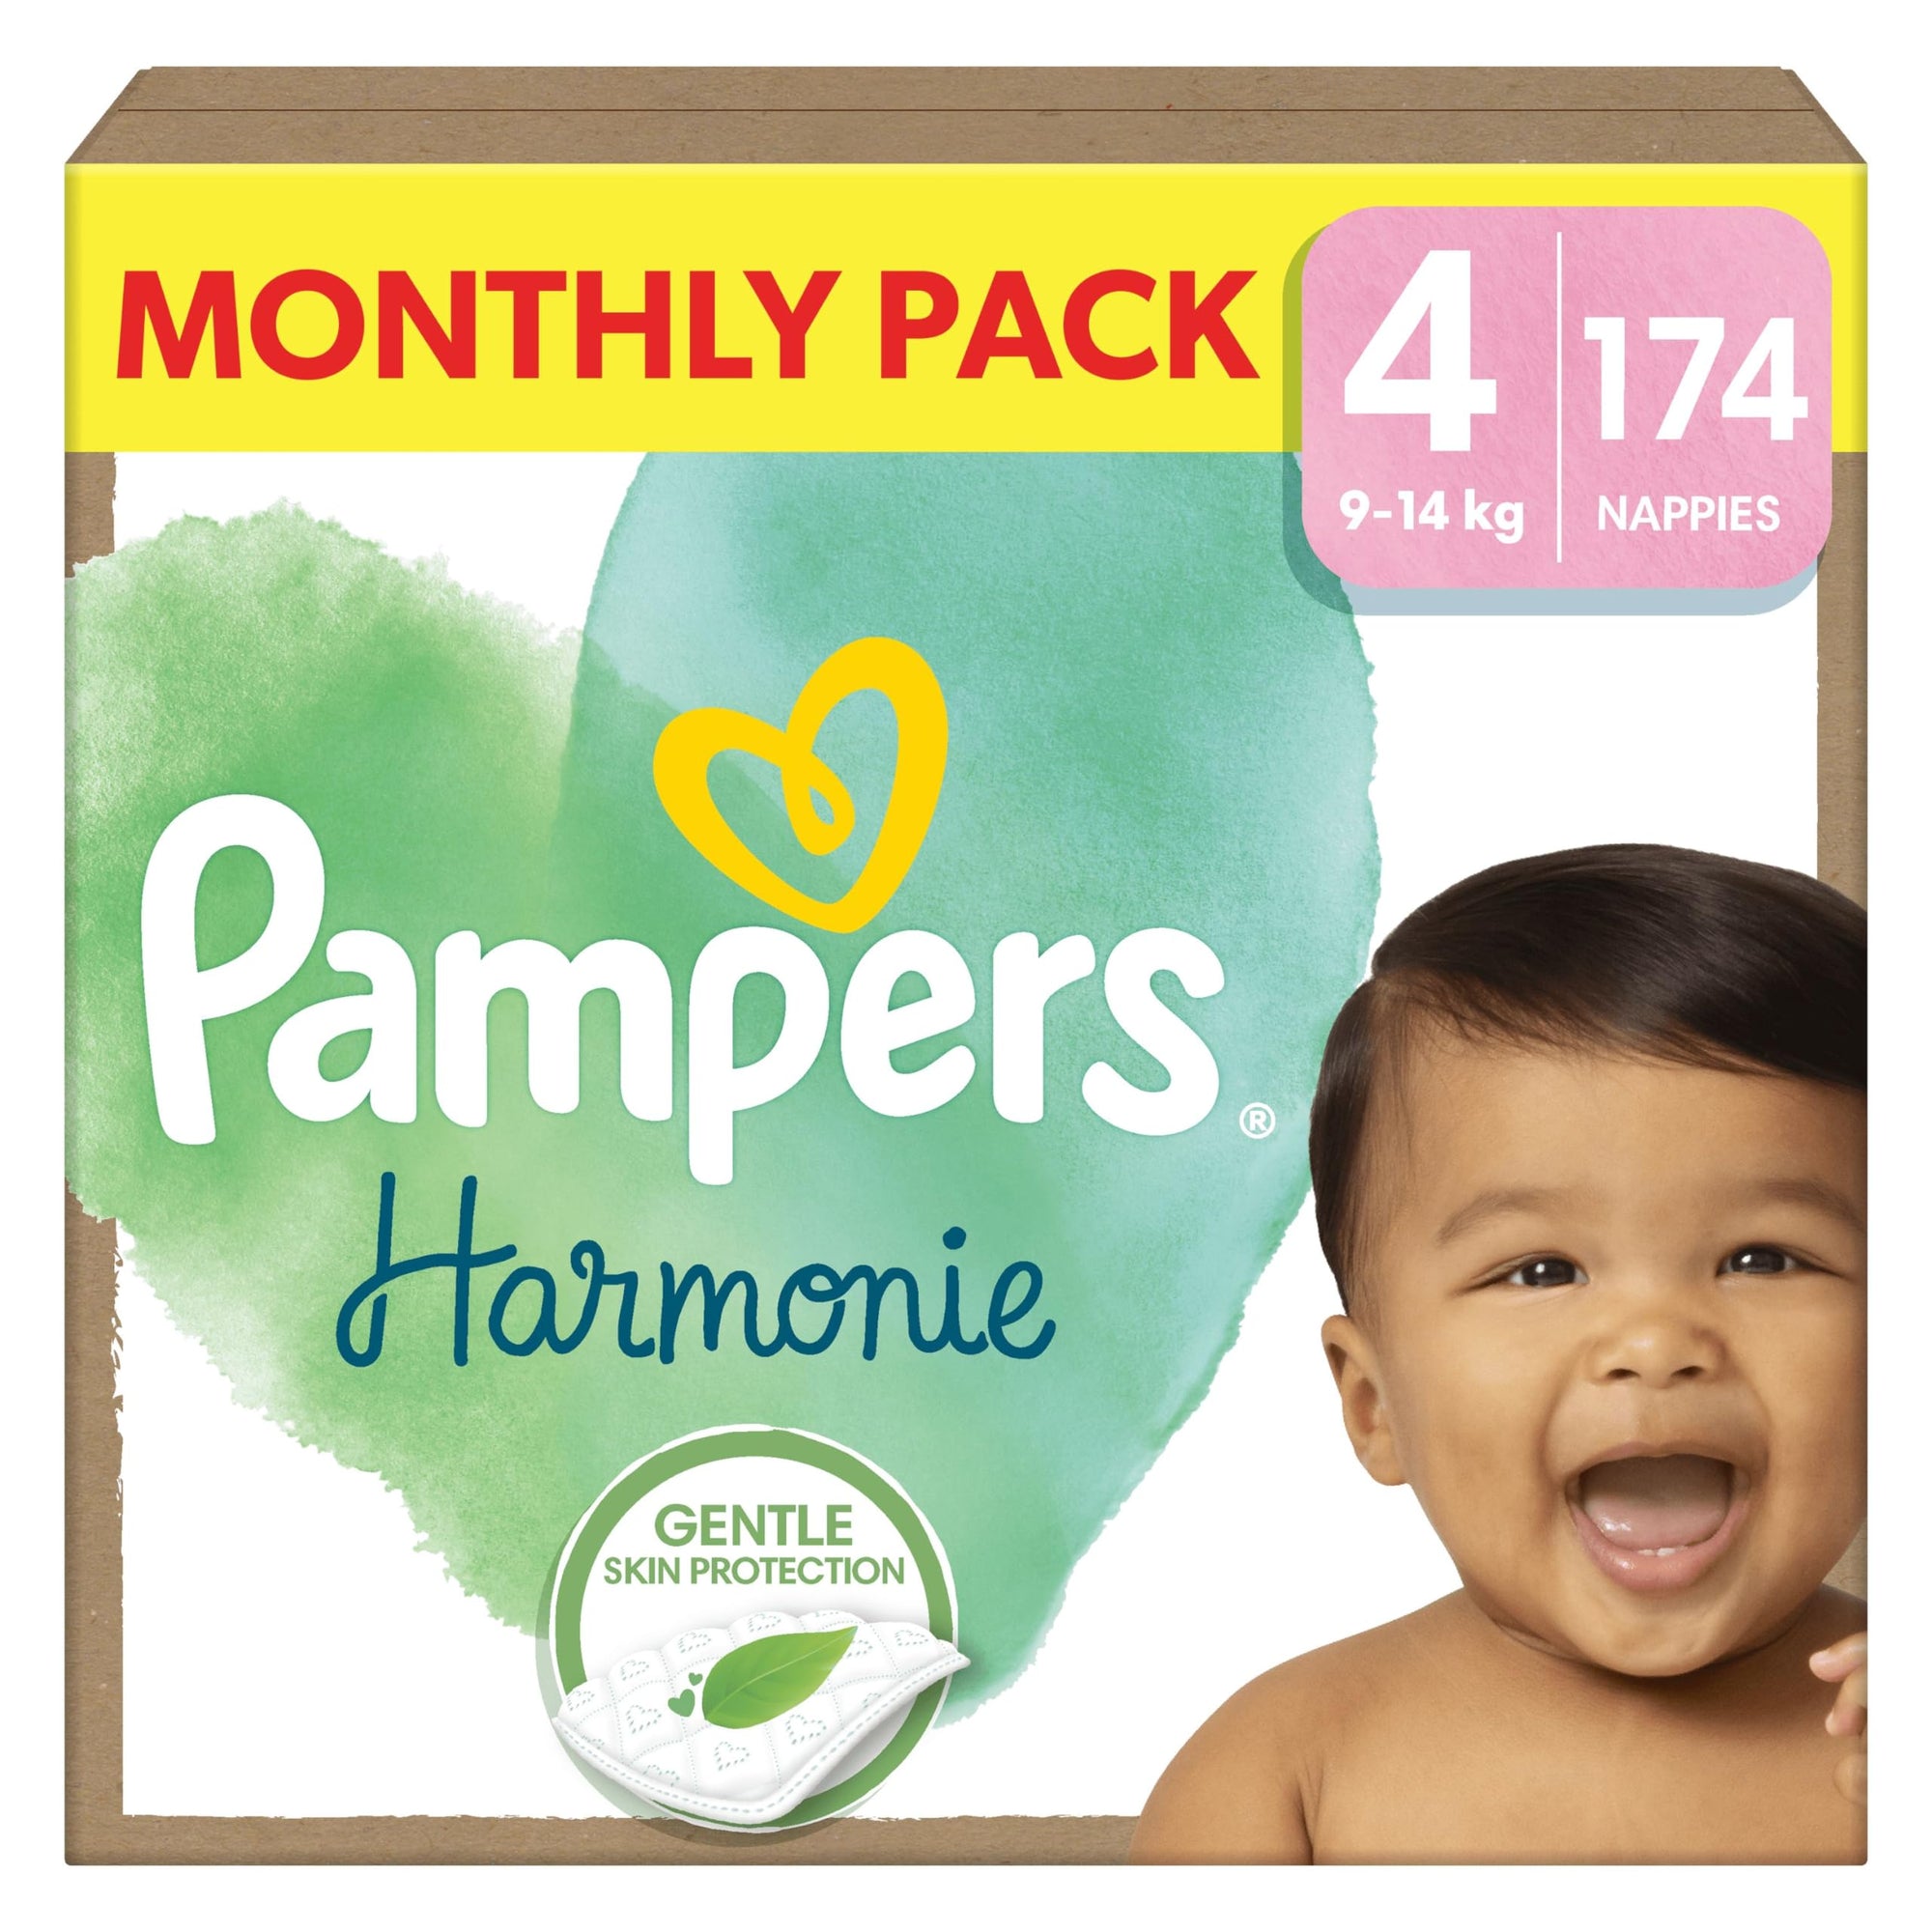 Pampers Harmonie Nappies Size 4, 9kg-14kg, 174 Nappies